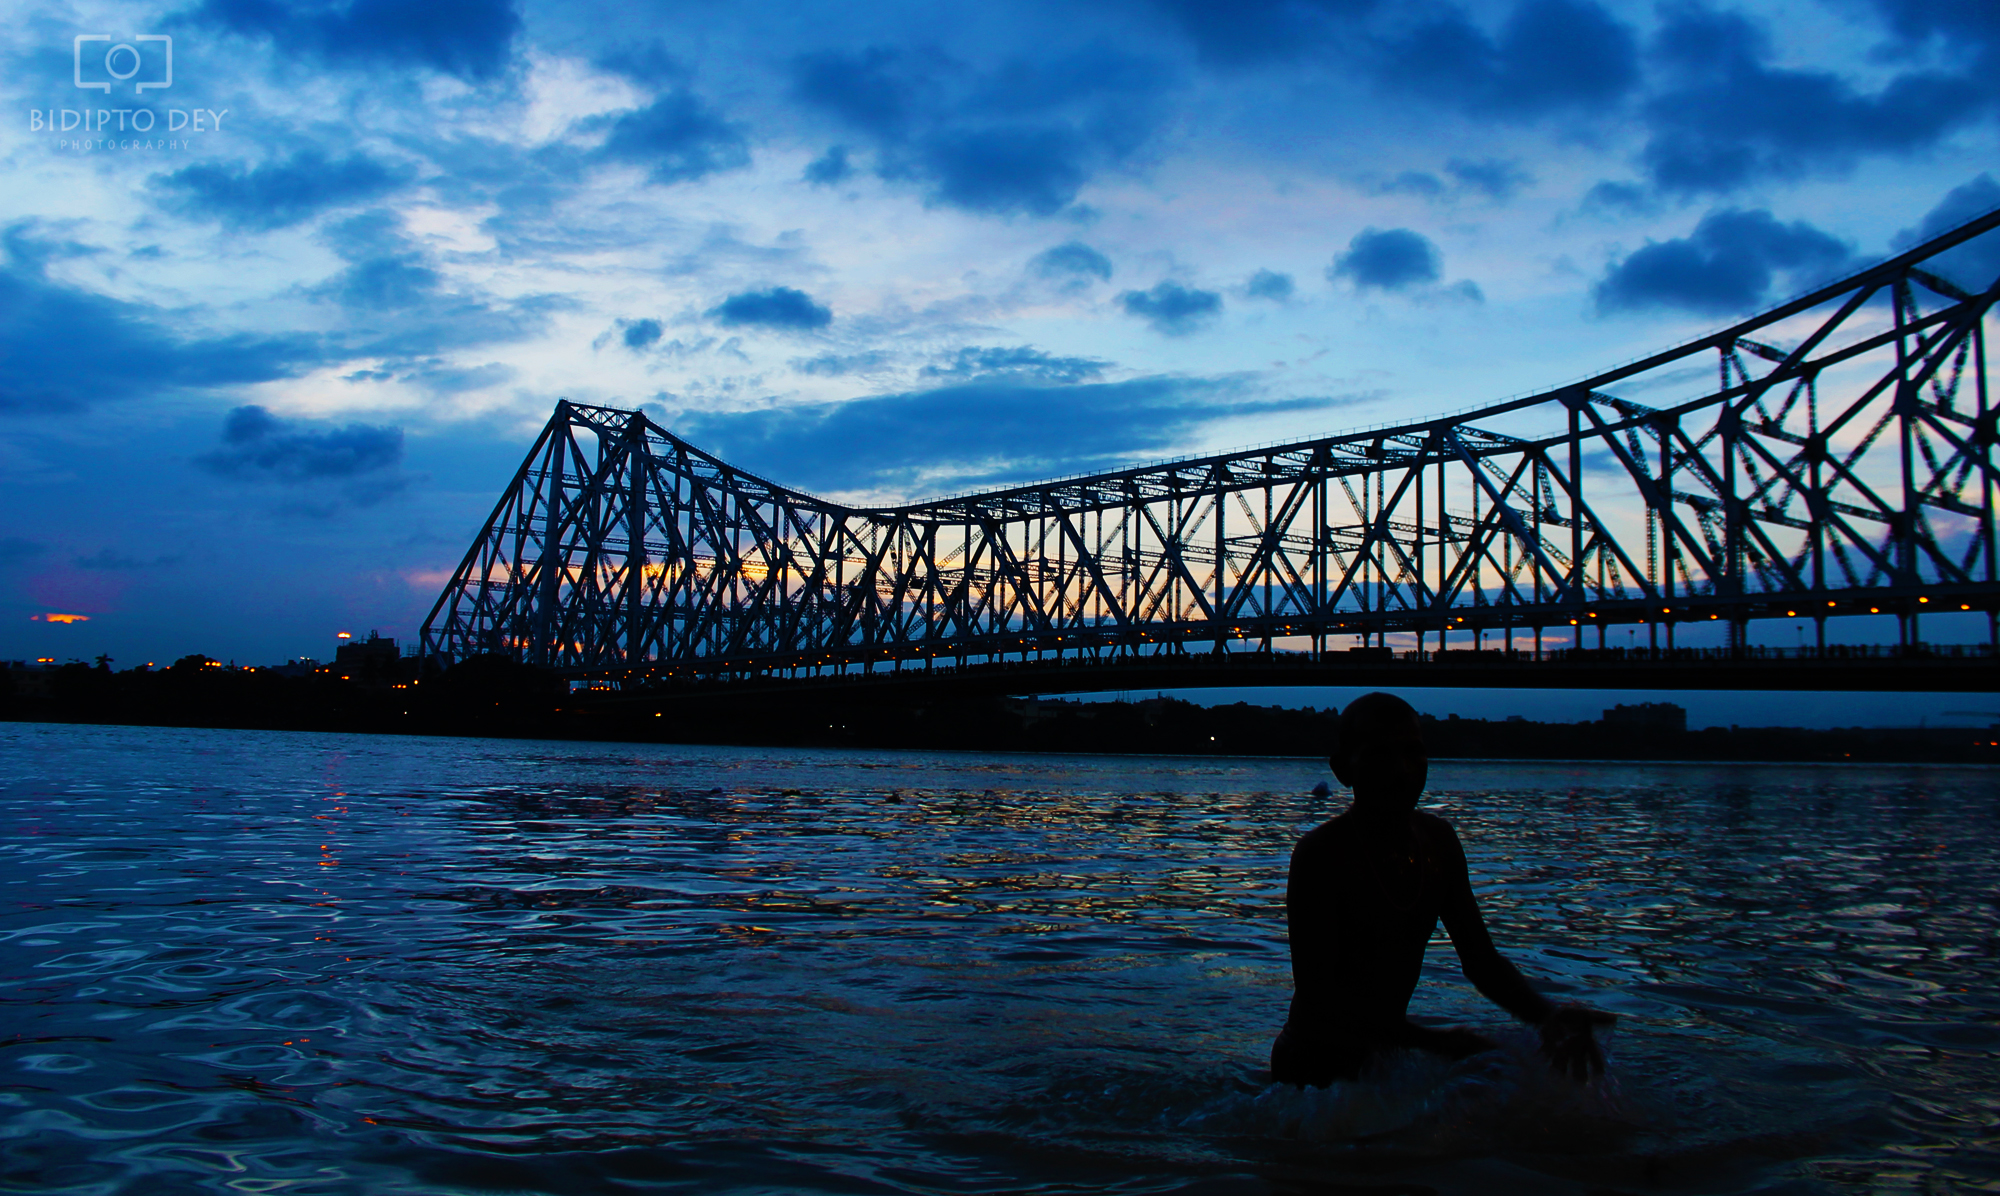 West Bengal – The vibrant state of India